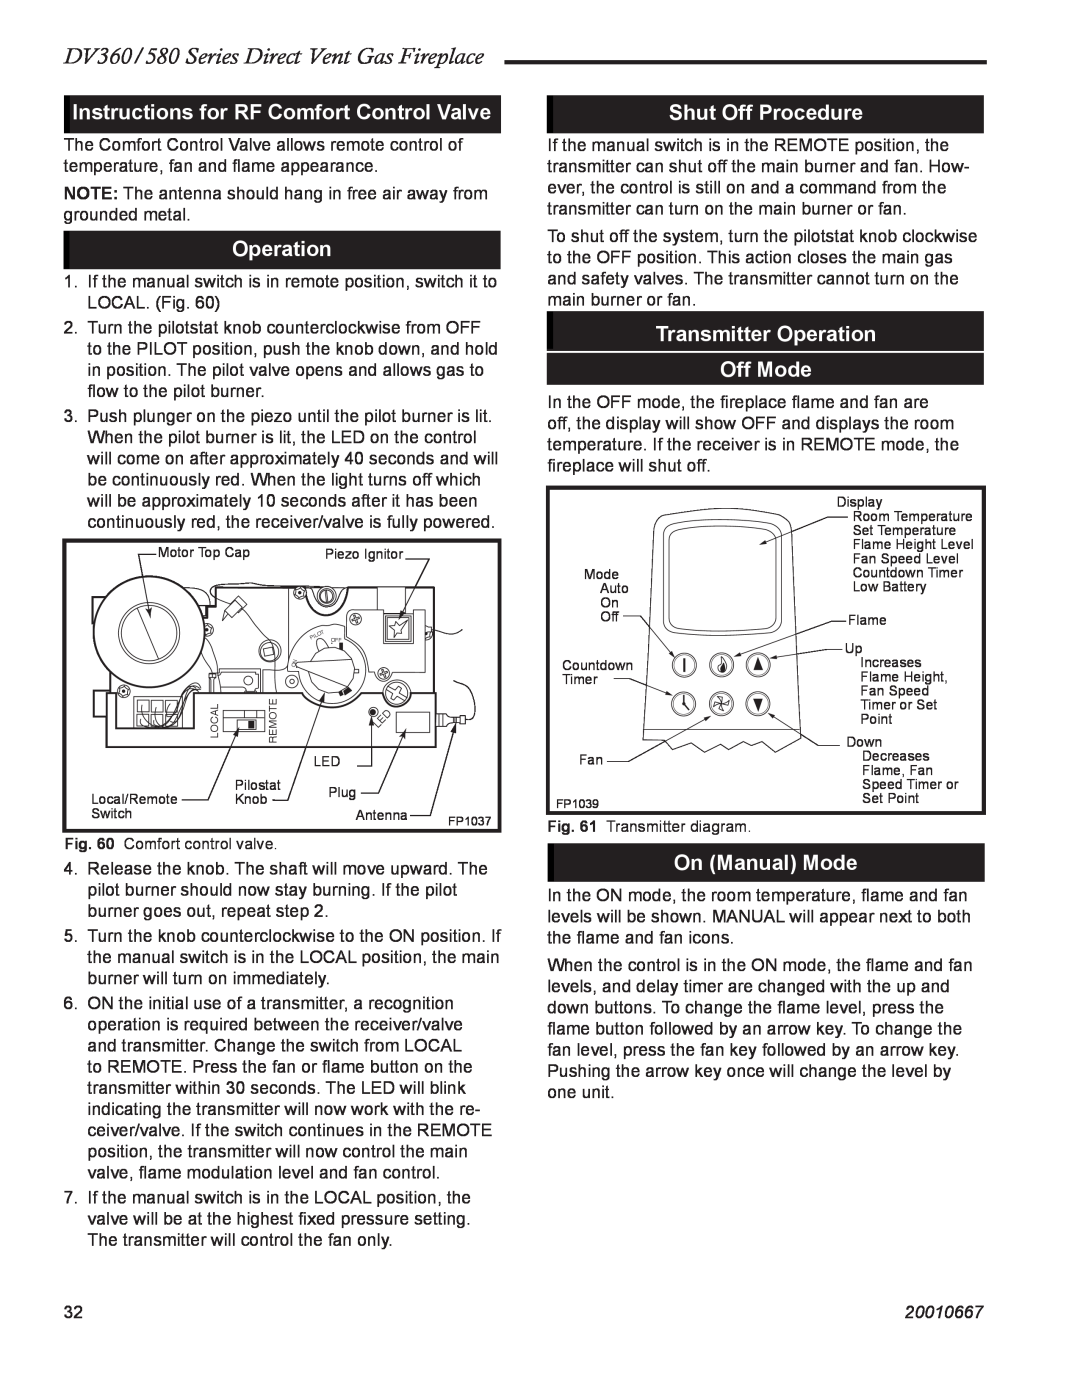 Vermont Casting DV580 Instructions for RF Comfort Control Valve, Operation, Shut Off Procedure, On Manual Mode, 20010667 